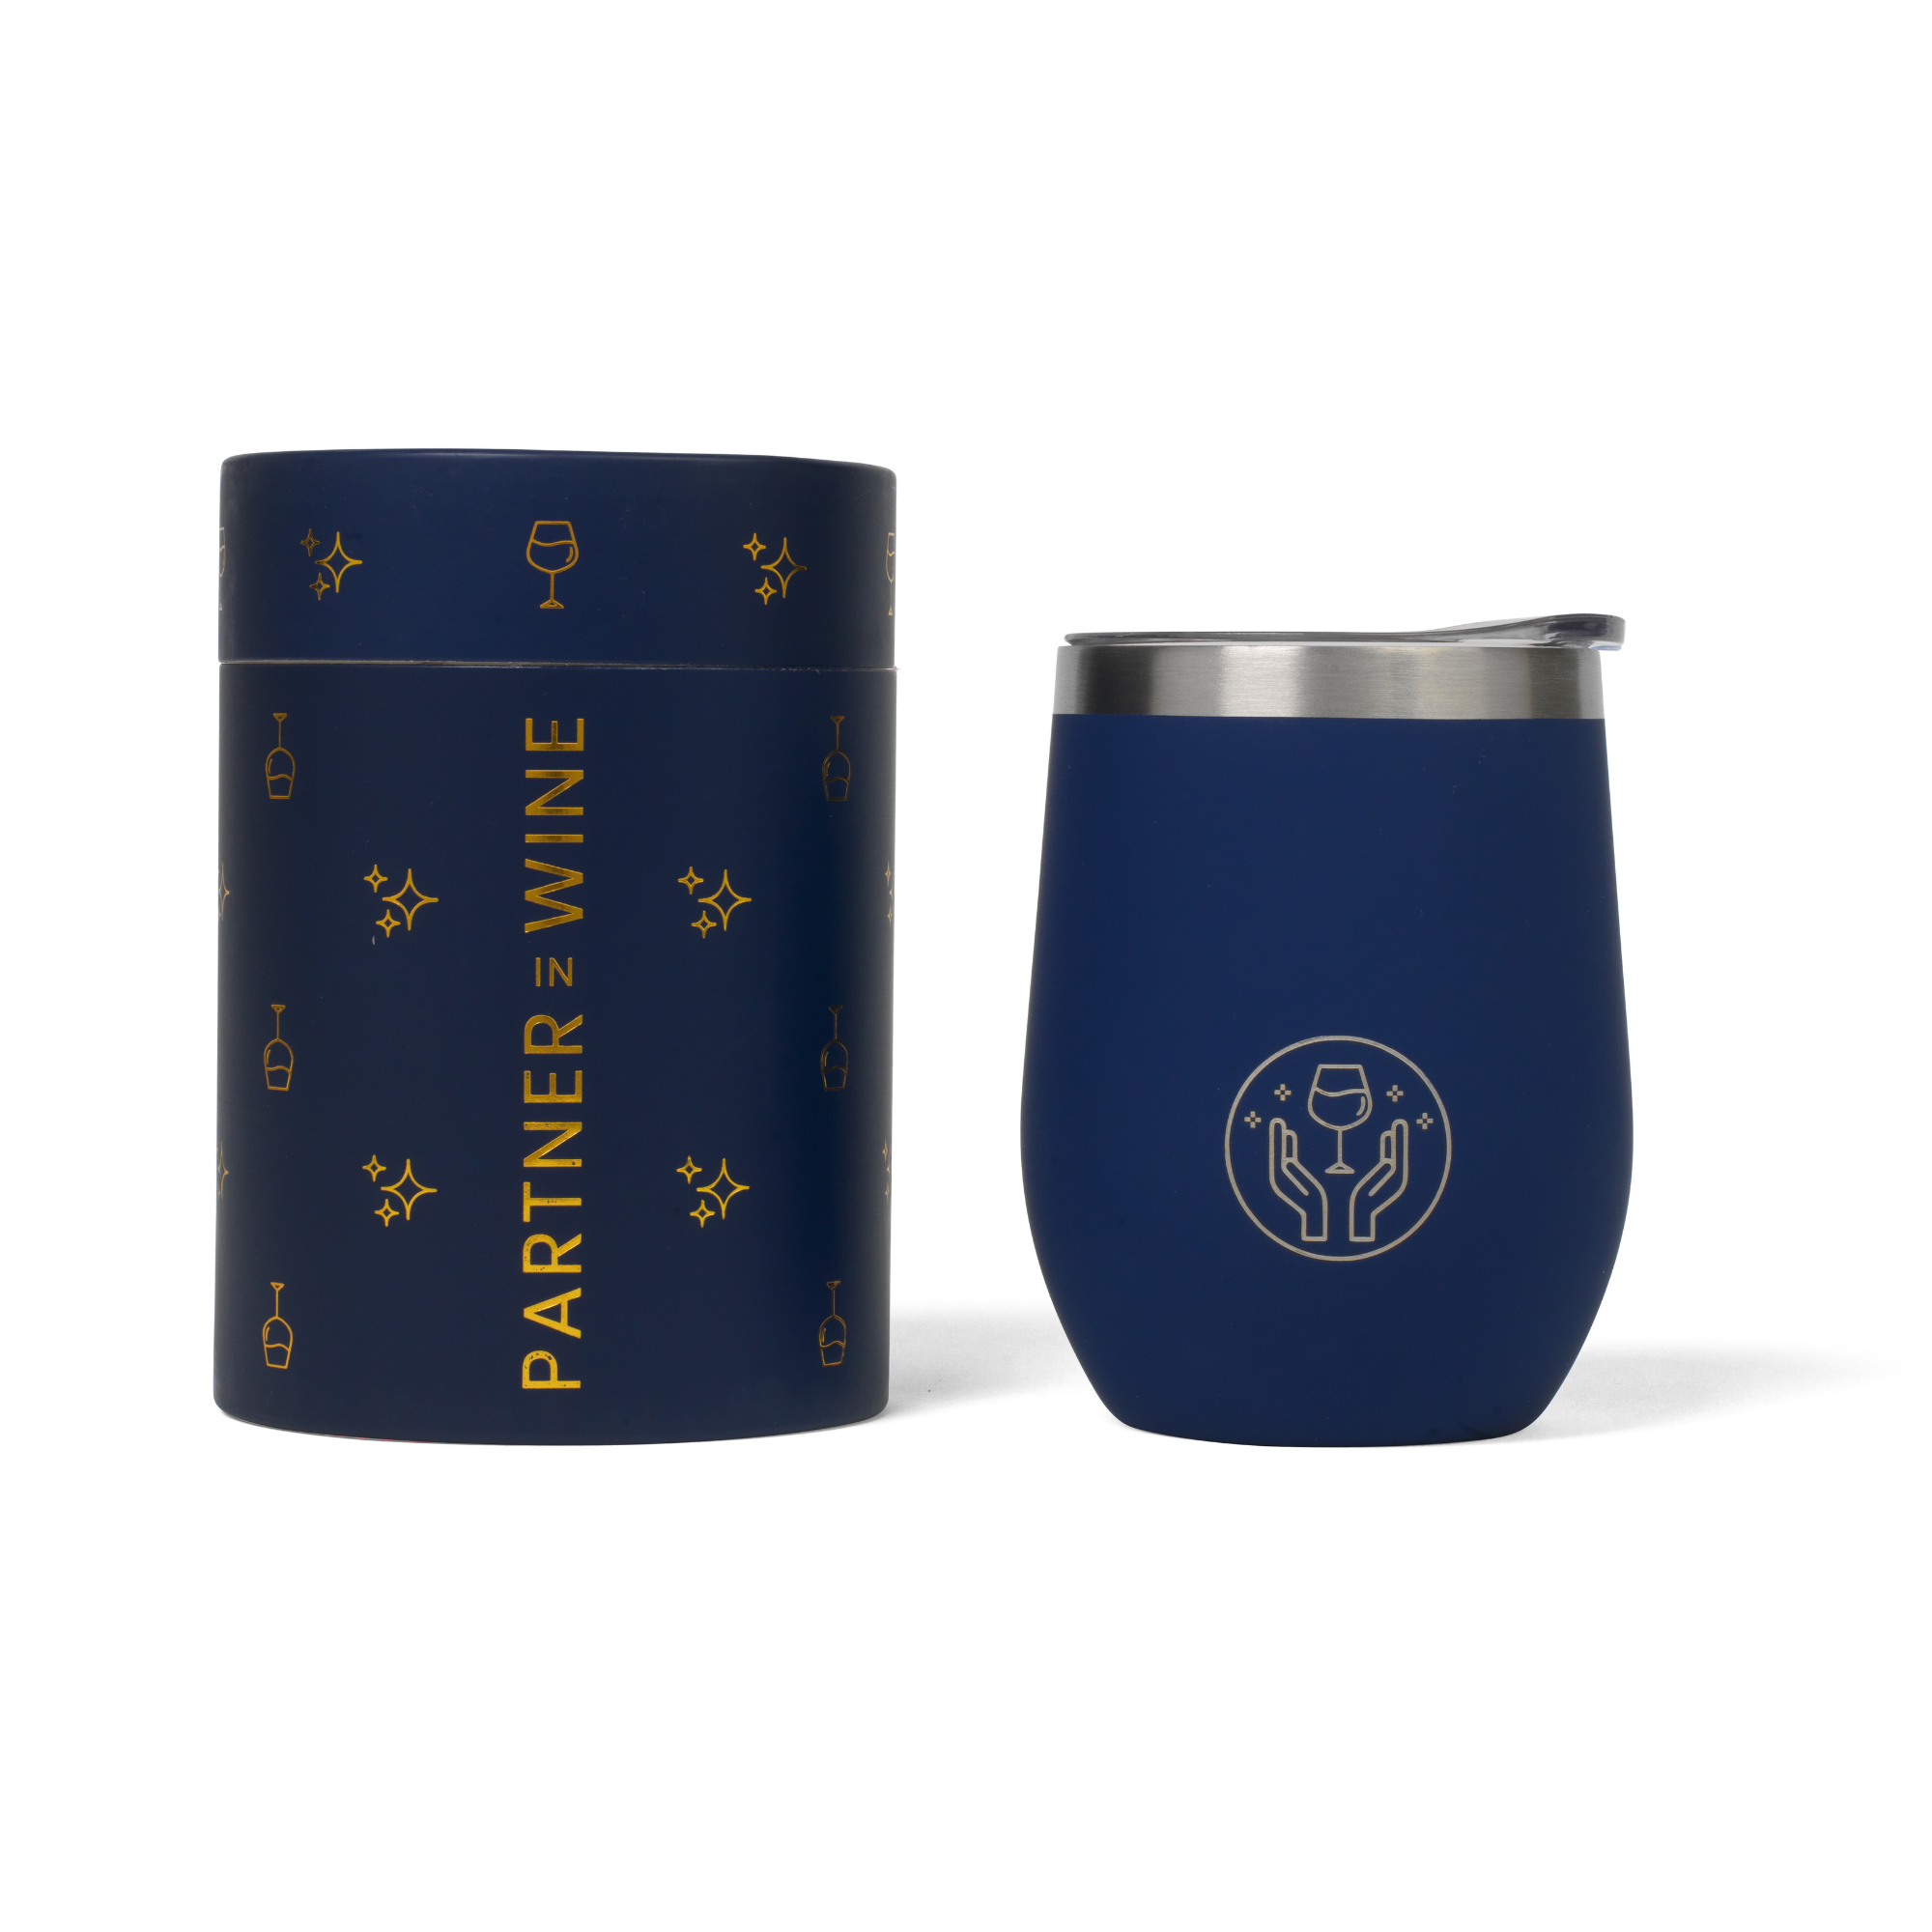 LIMITED EDITION The Partner in Wine Tumbler - Midnight Blue